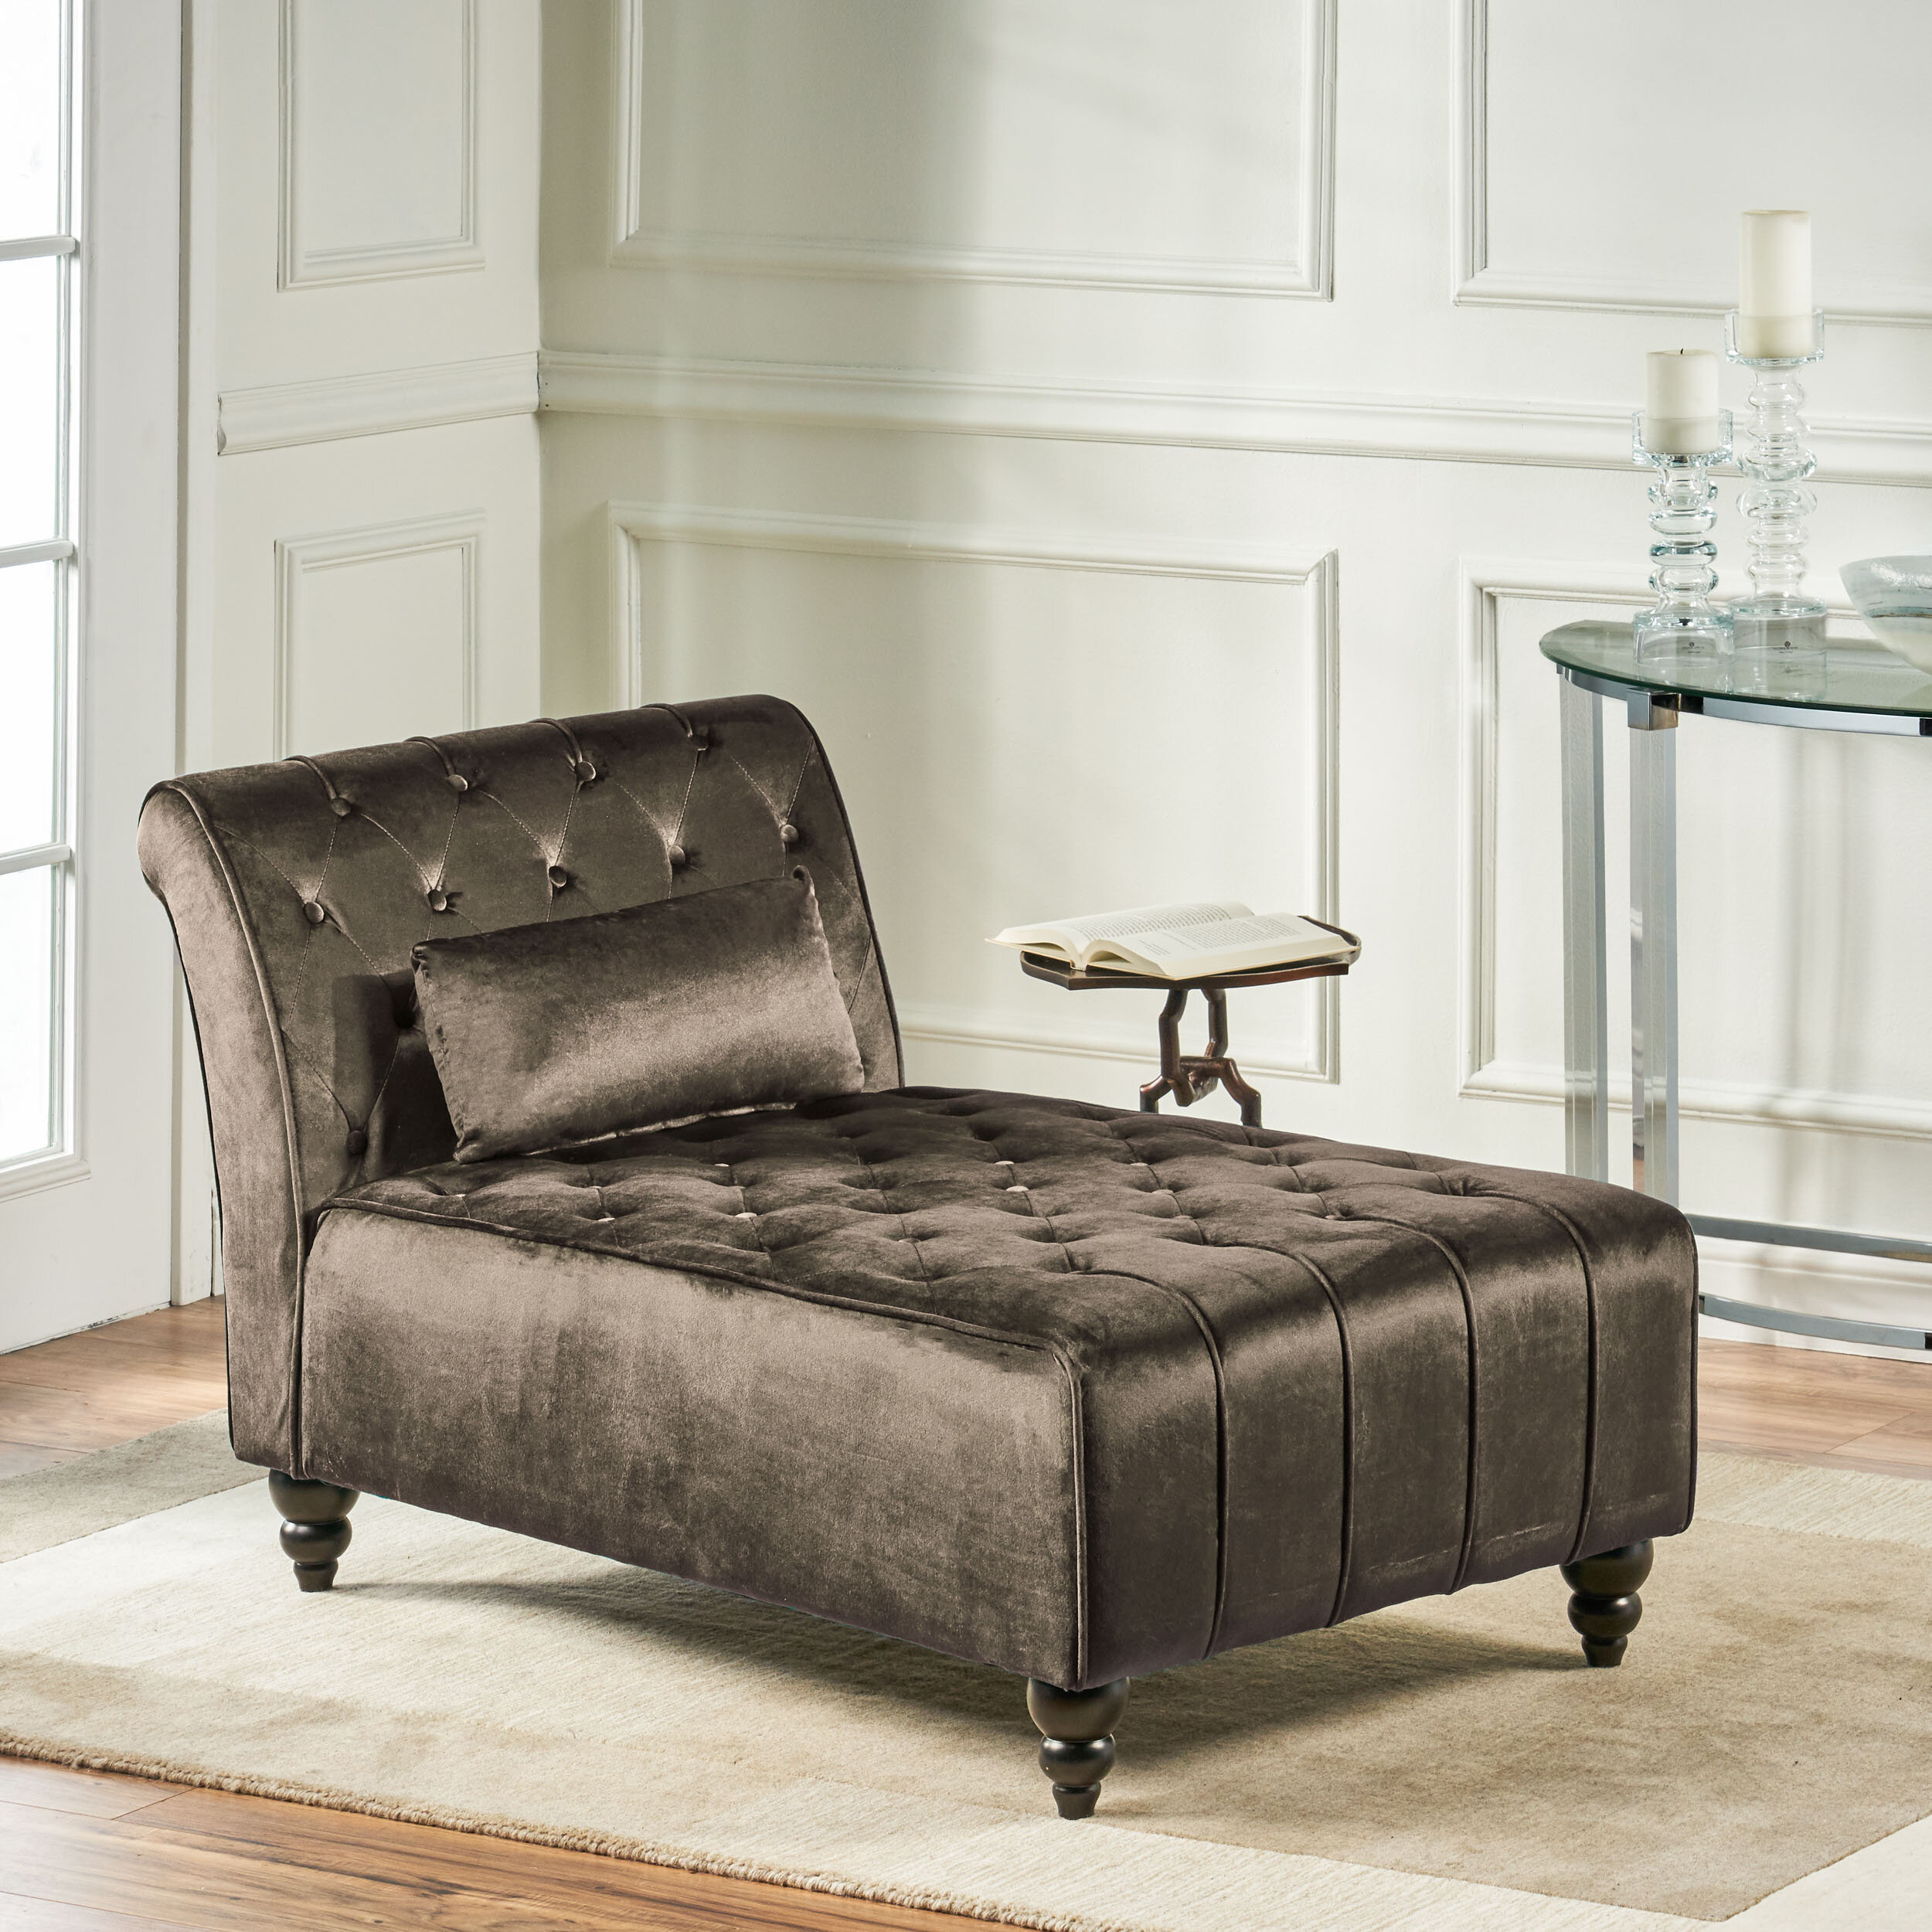 Andrews Upholstered Chaise Lounge